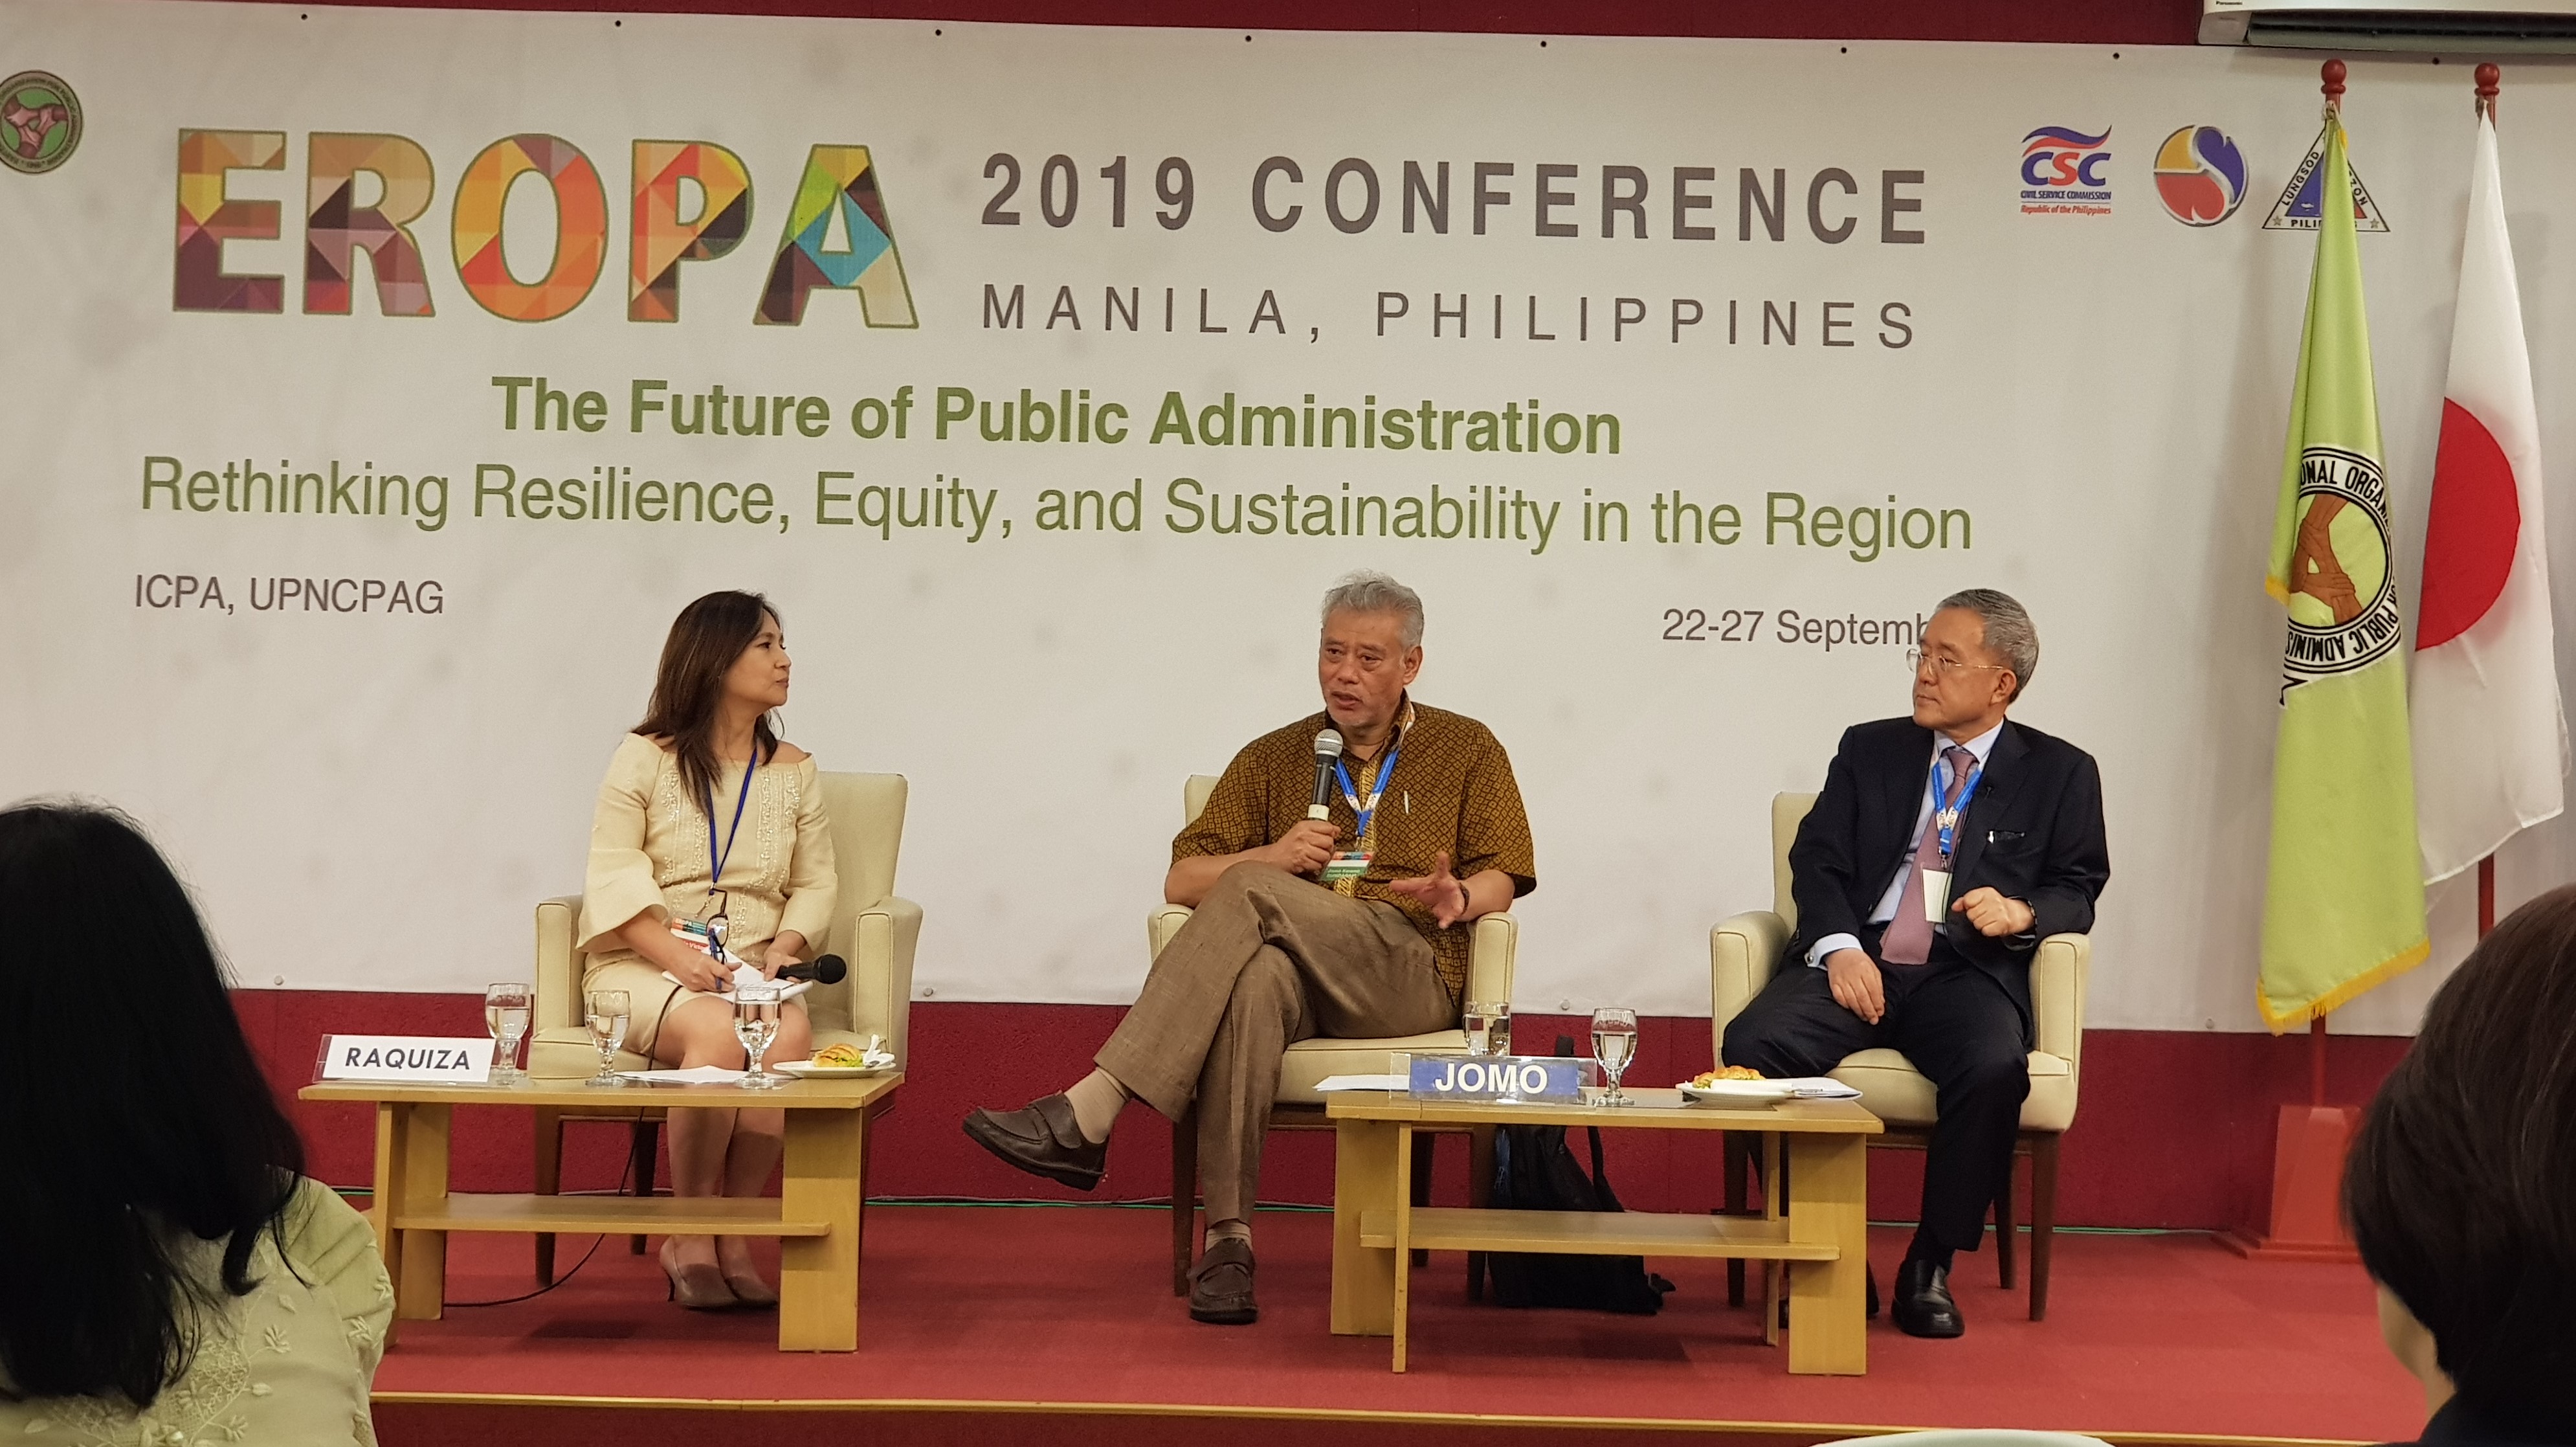 LOGODI attends the  EROPA 27th General Assembly and Conference 큰 이미지[마우스 클릭 시 창닫기]